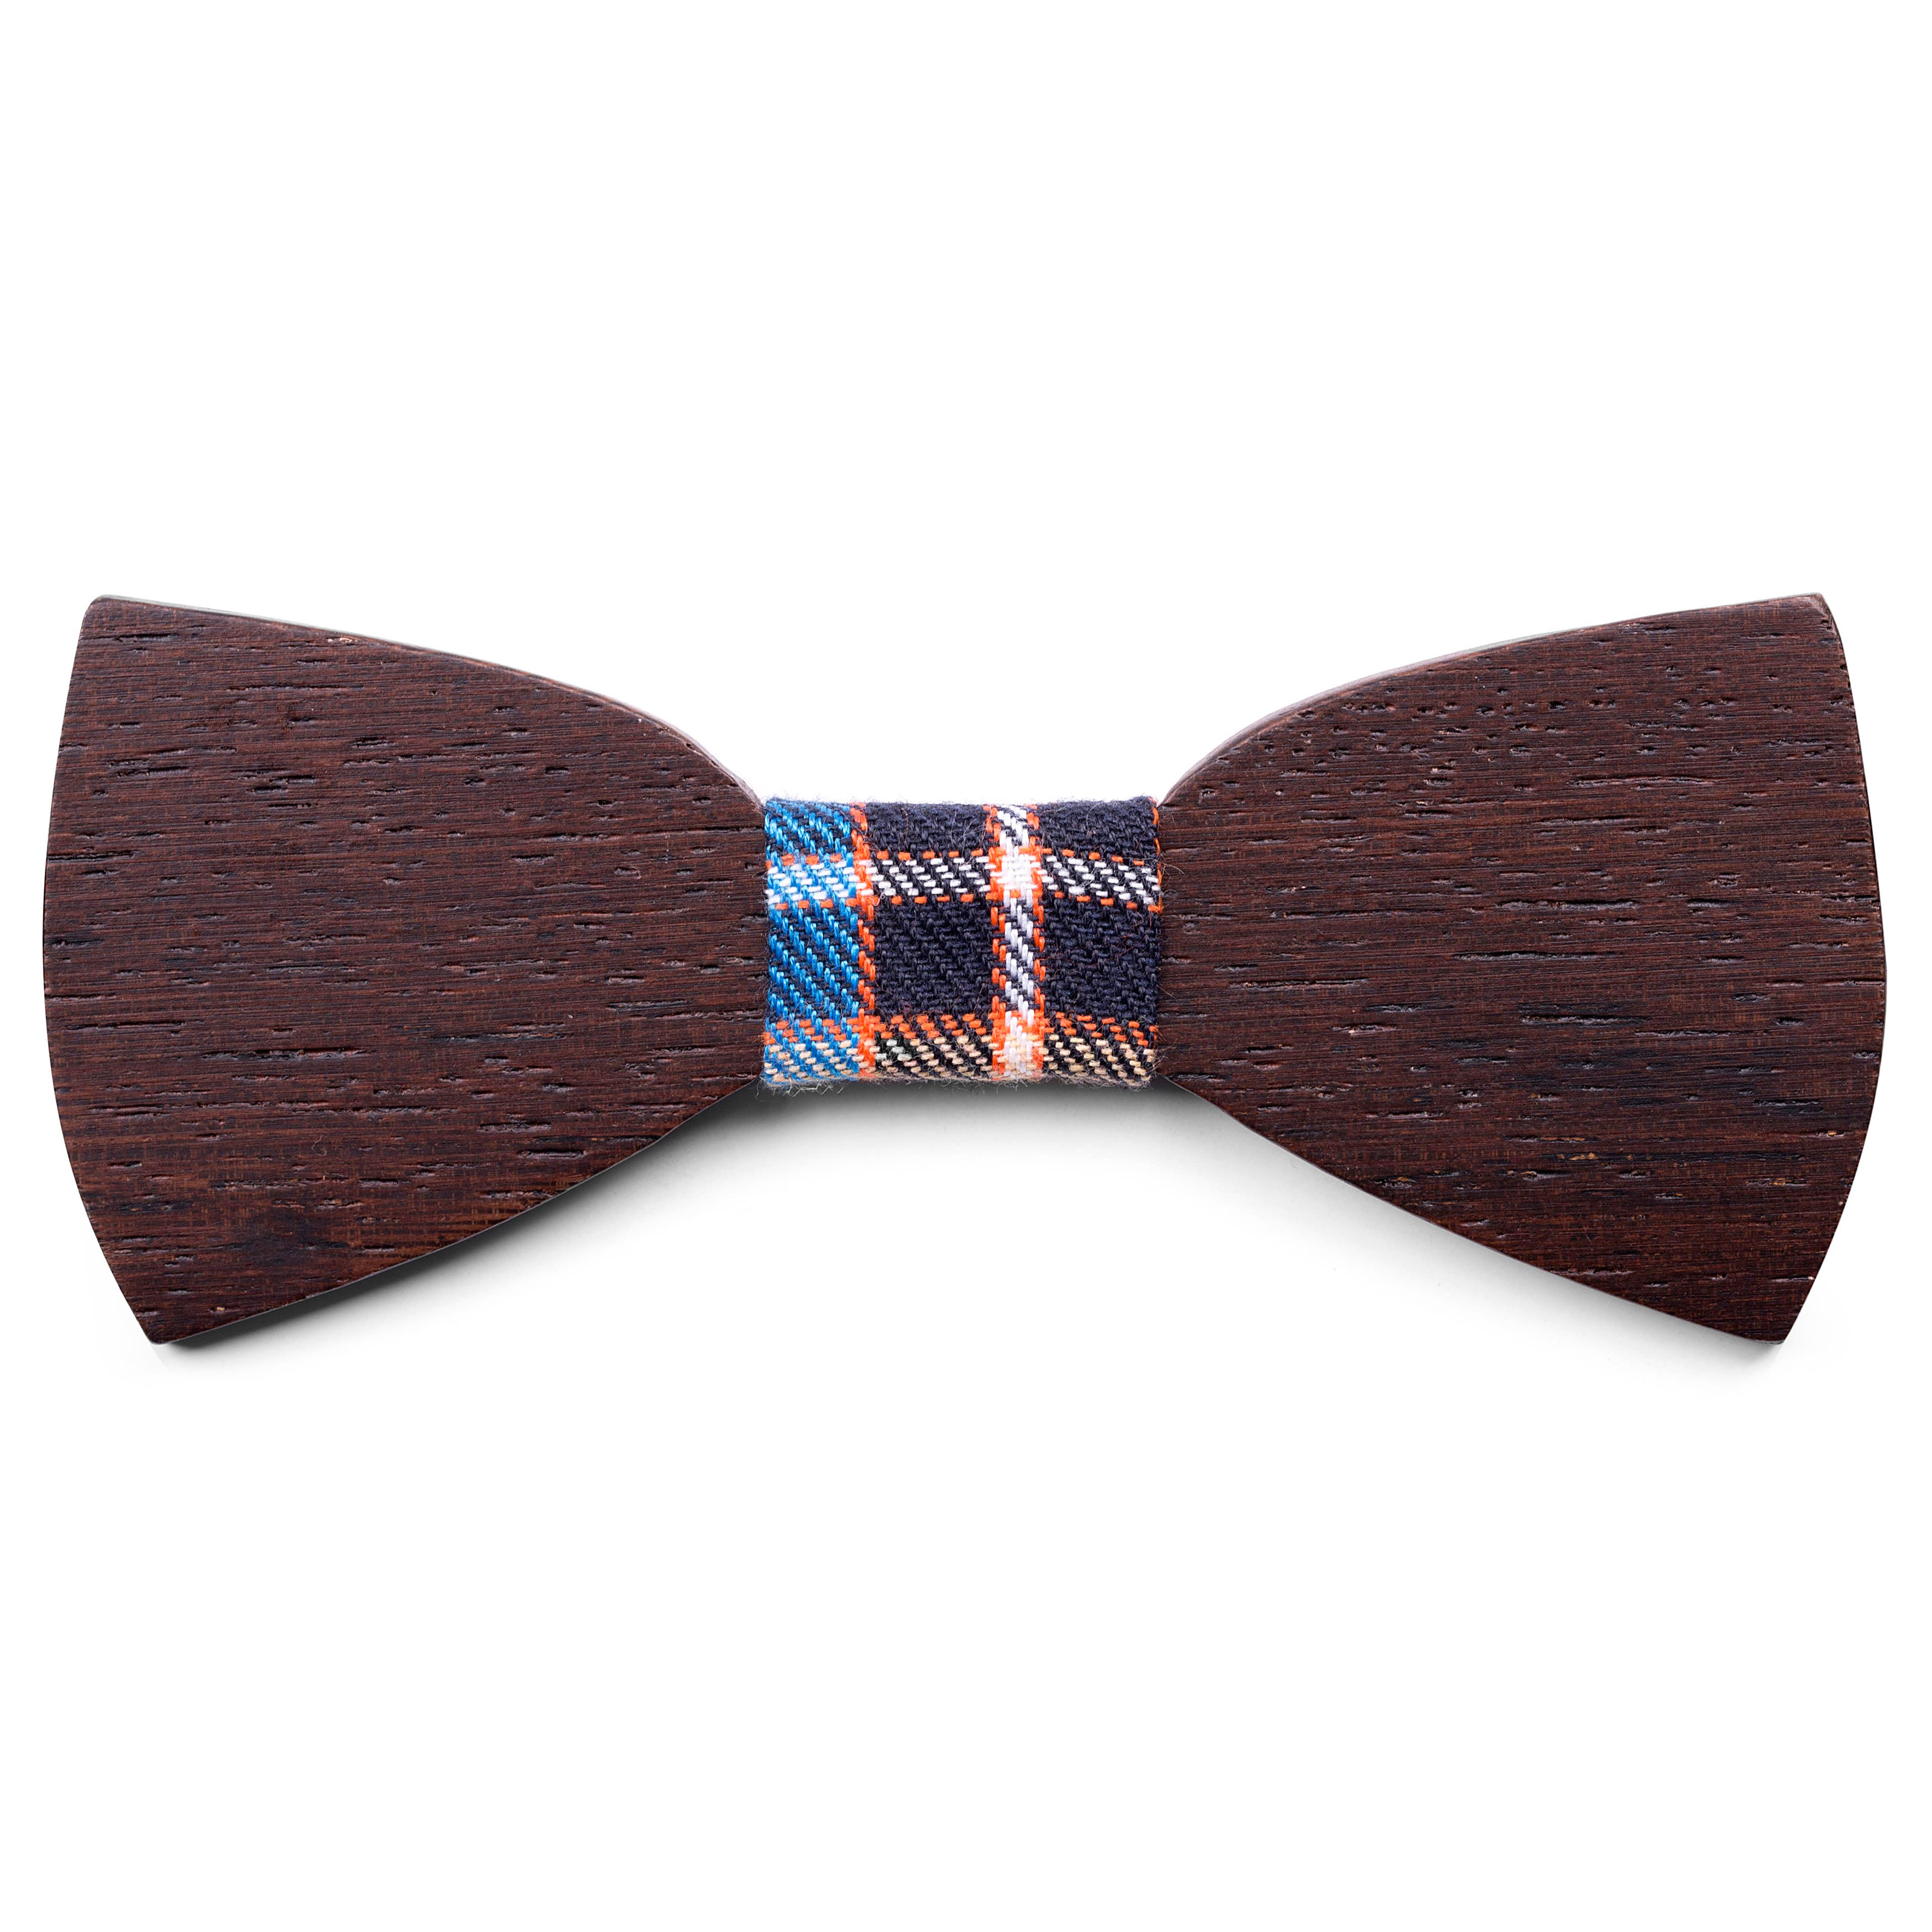 African Wenge Wood Bow Tie with Fabric Detail